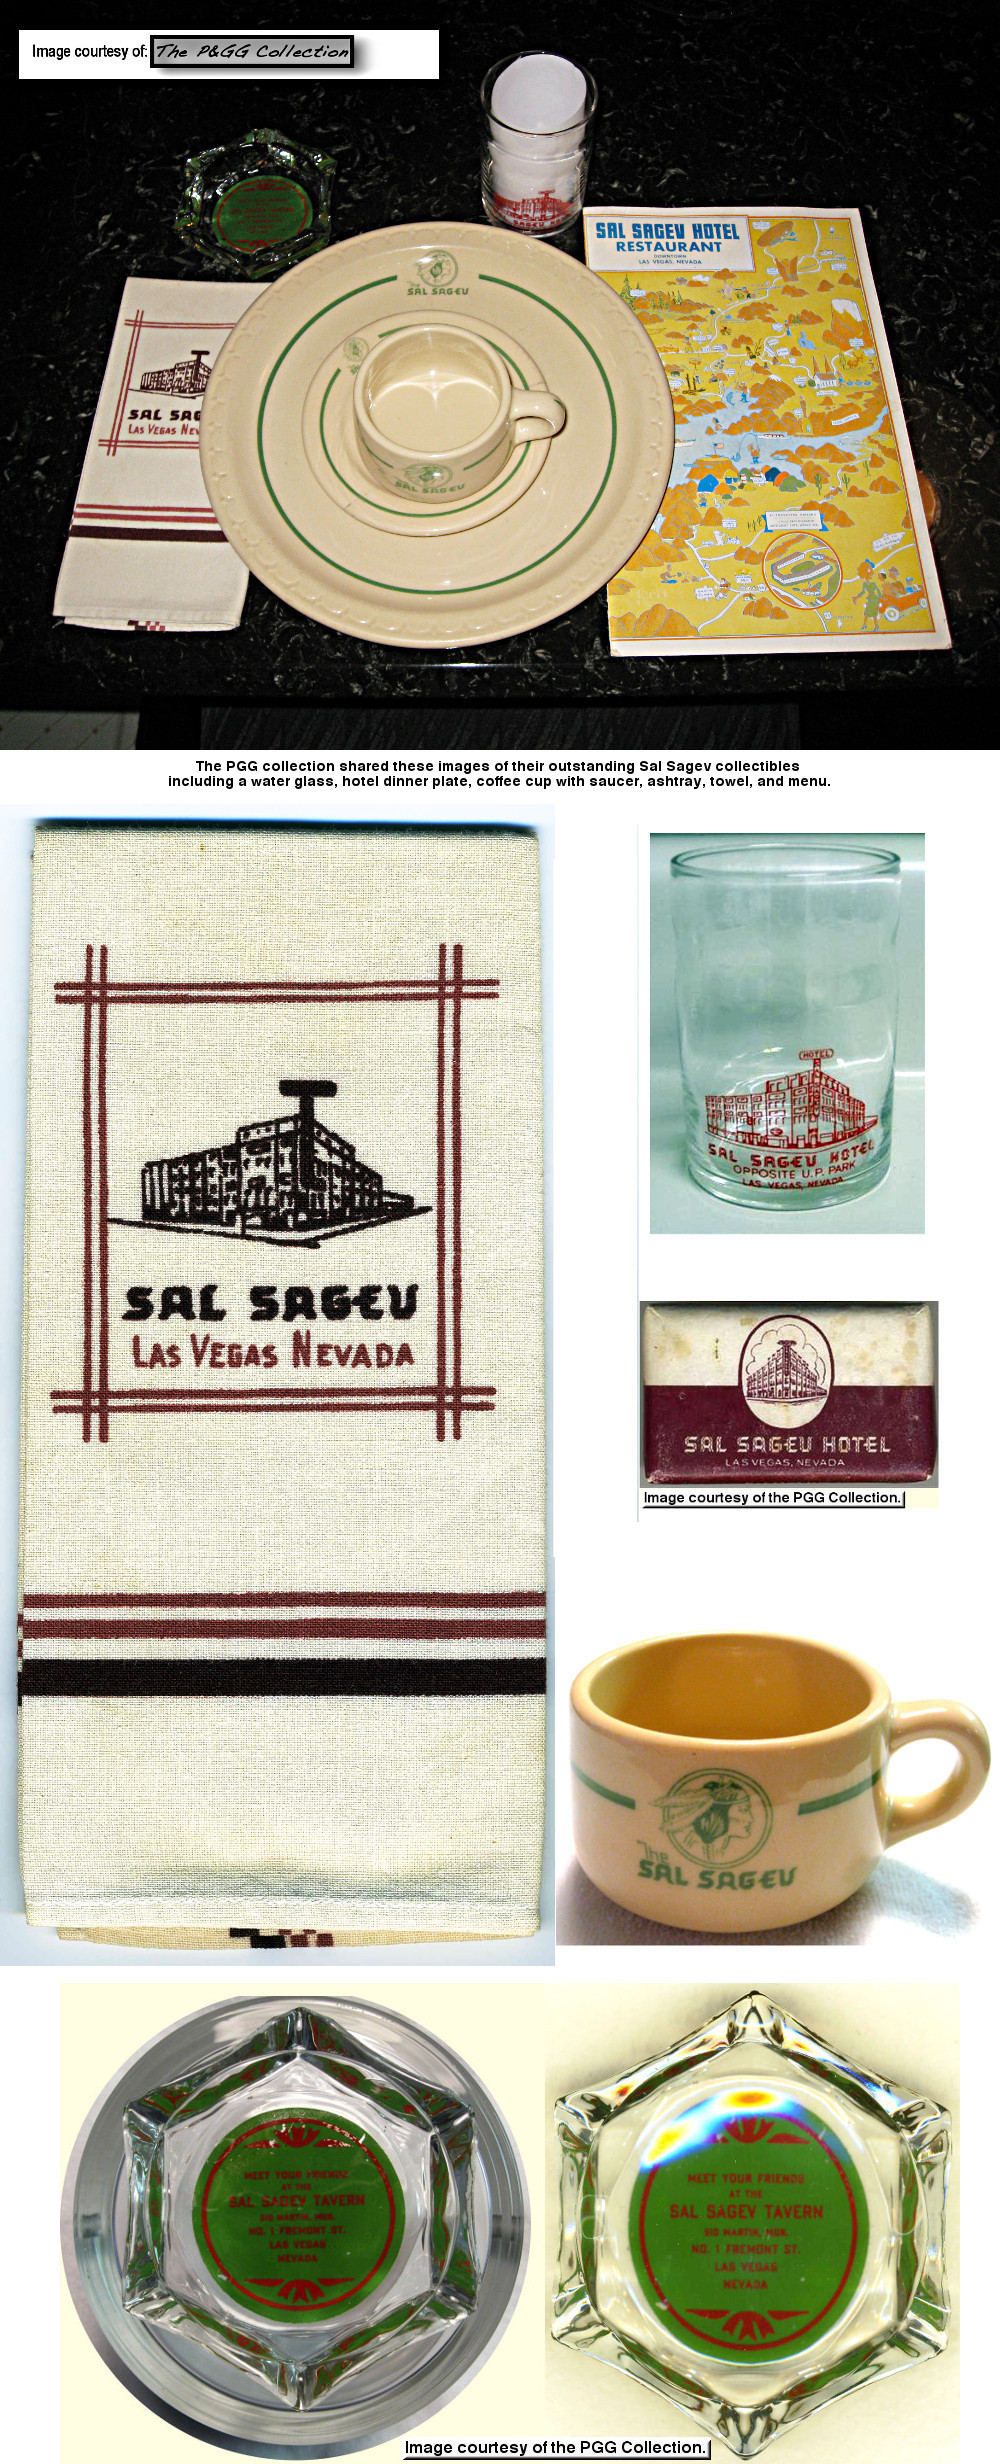 The PGG collection shared these images of their outstanding Sal Sagev collectibles including a water glass, hotel dinner plate, coffee cup with saucer, ashtray, towel, and menu.